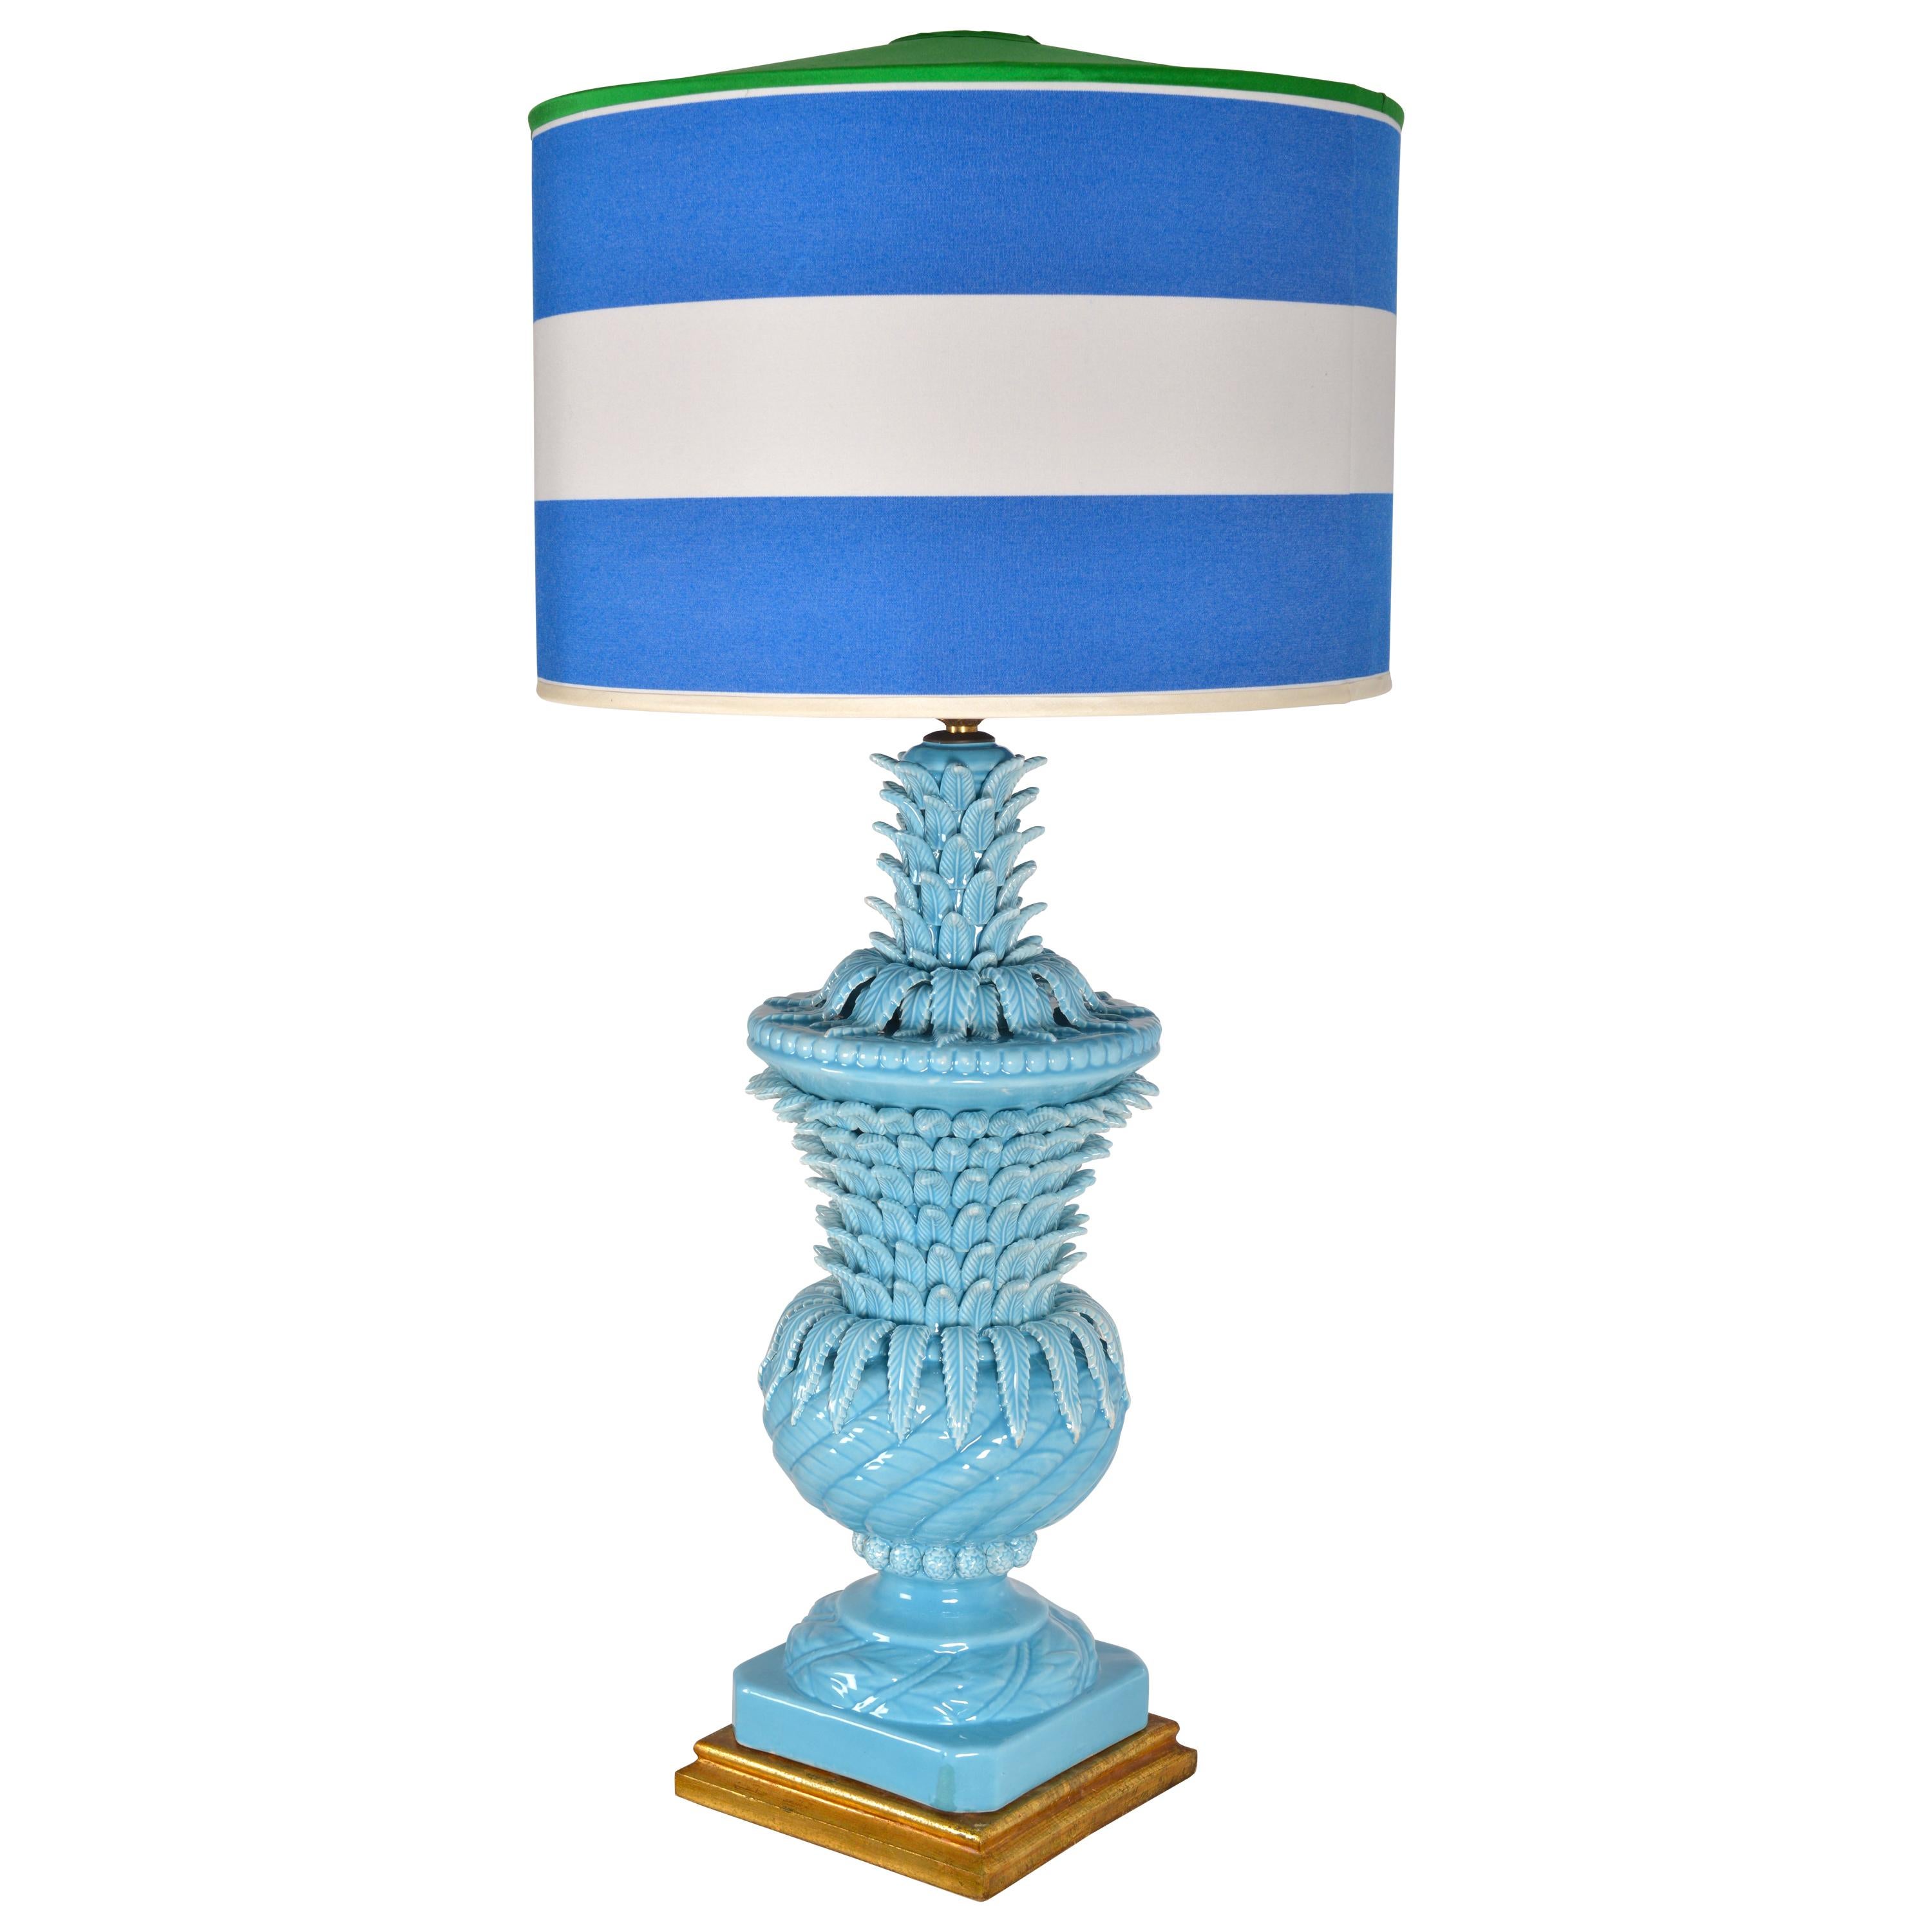 Spanish Turquoise Pineapple Table Lamp For Sale